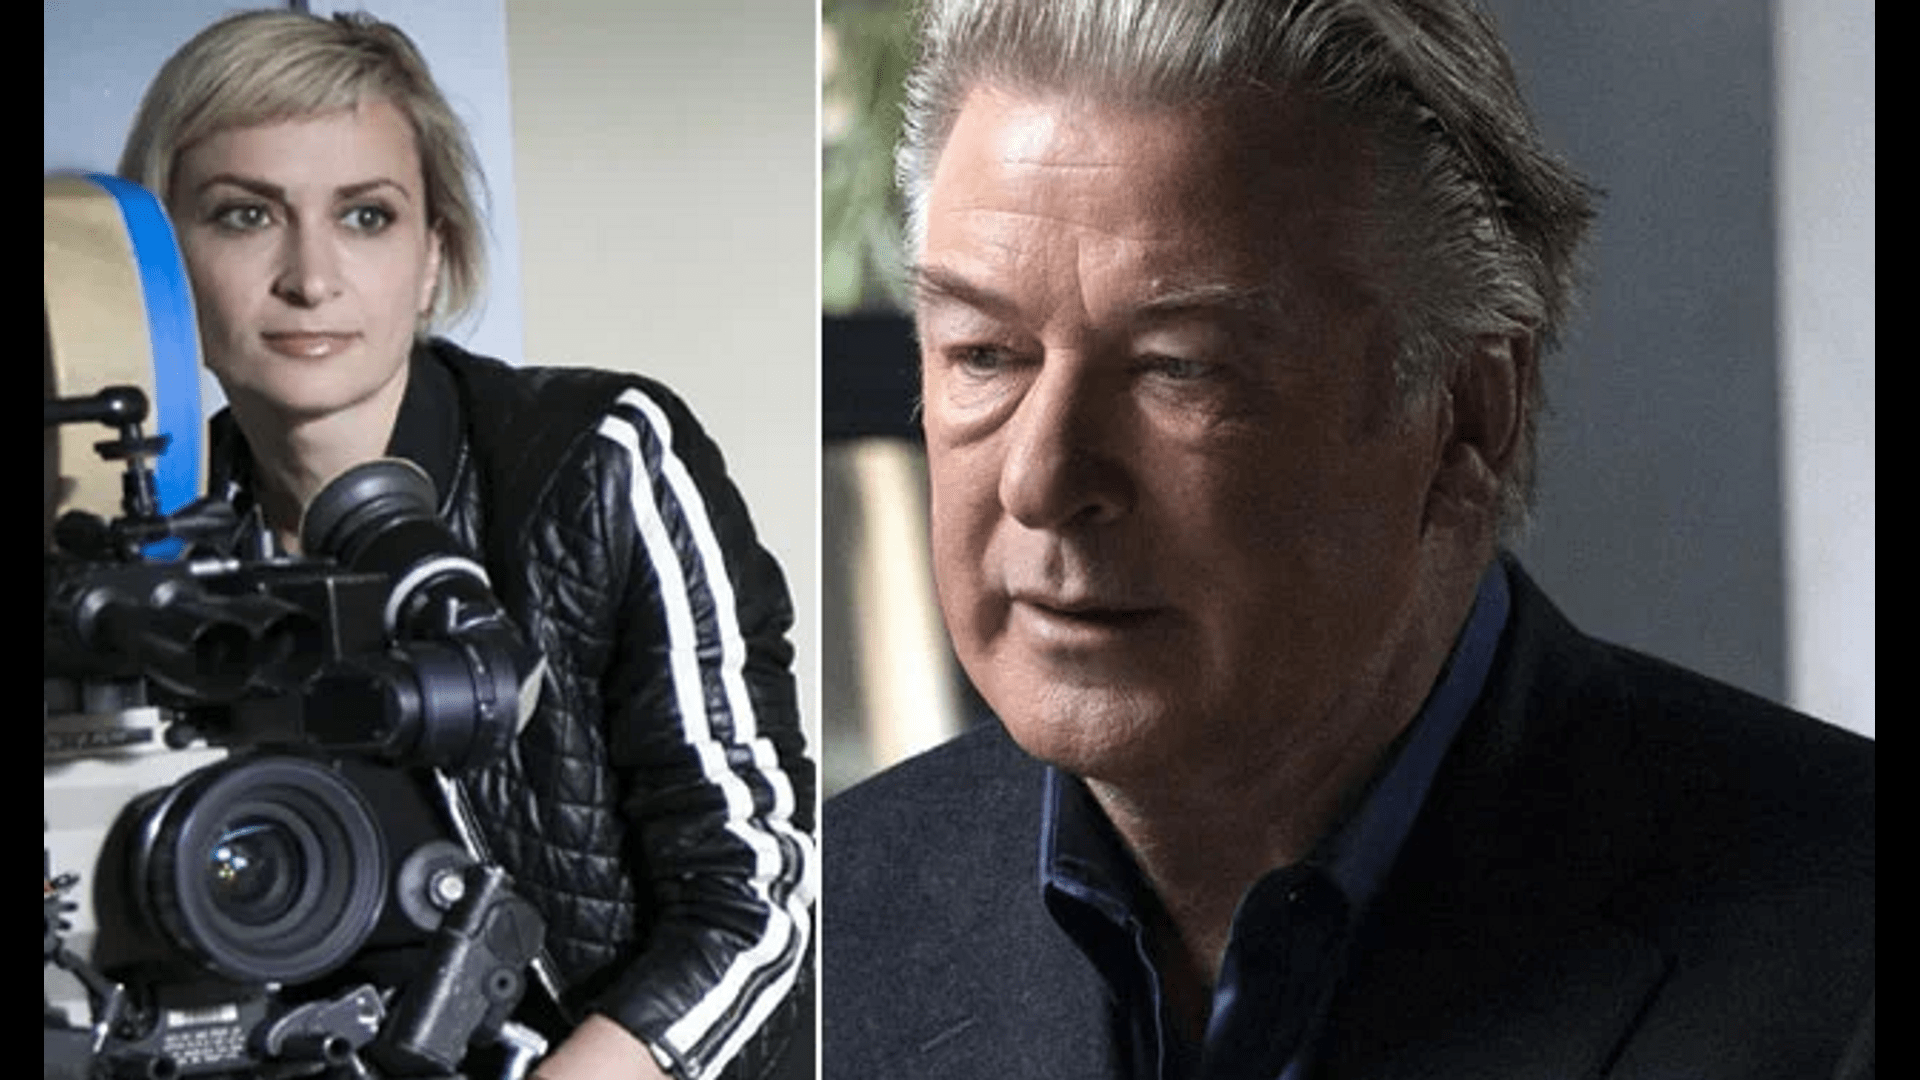 Experts confirm Baldwin's innocence in the shooting on the set of "Rust